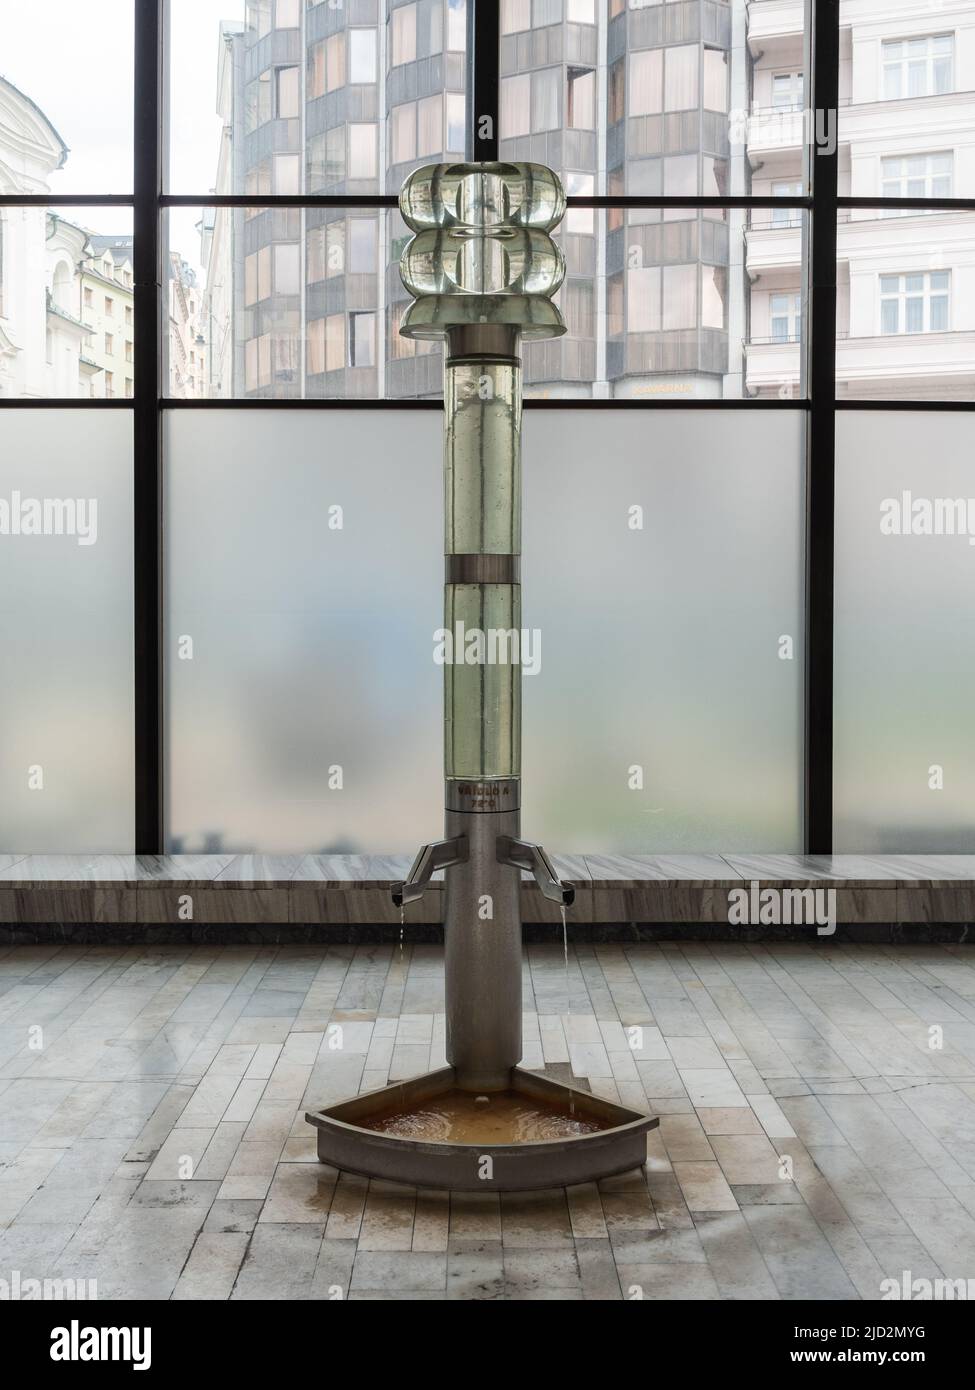 Karlovy Vary, Czech Republic - May 26 2022: Vrdlo A Hot Spring Drinking Fountain Glass Sculpture inside the Hot Spring Colonnade or Vridelni Kolonada Stock Photo